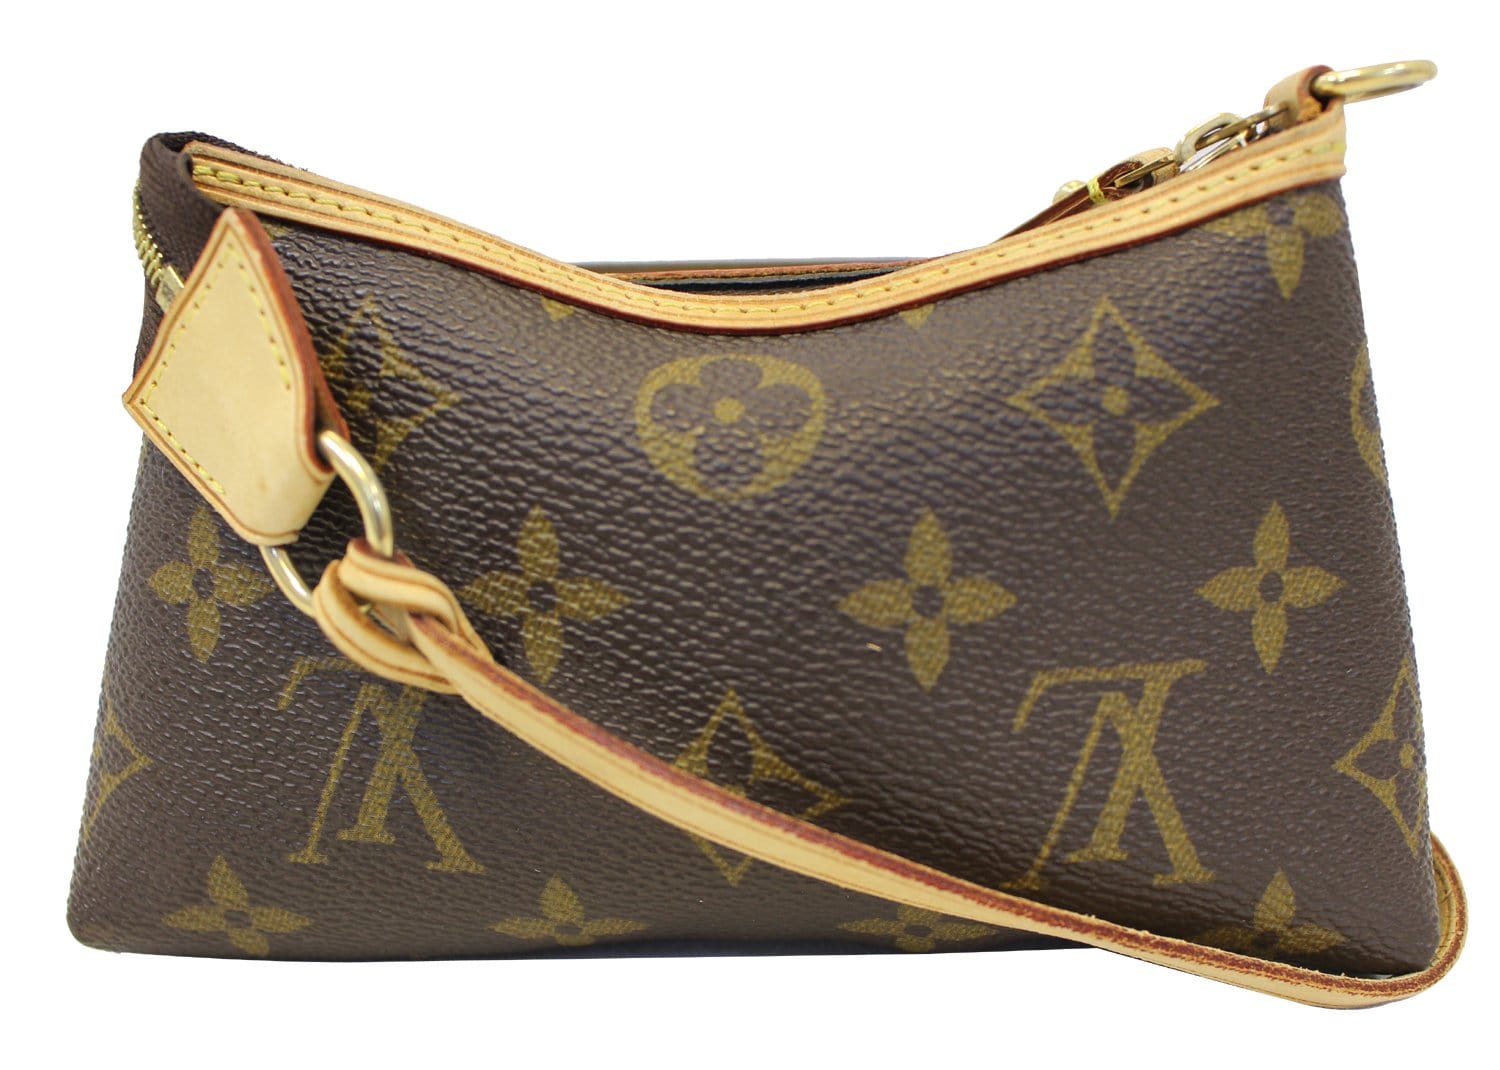 Requested: Updated Louis Vuitton Delightful Mini Pochette Review